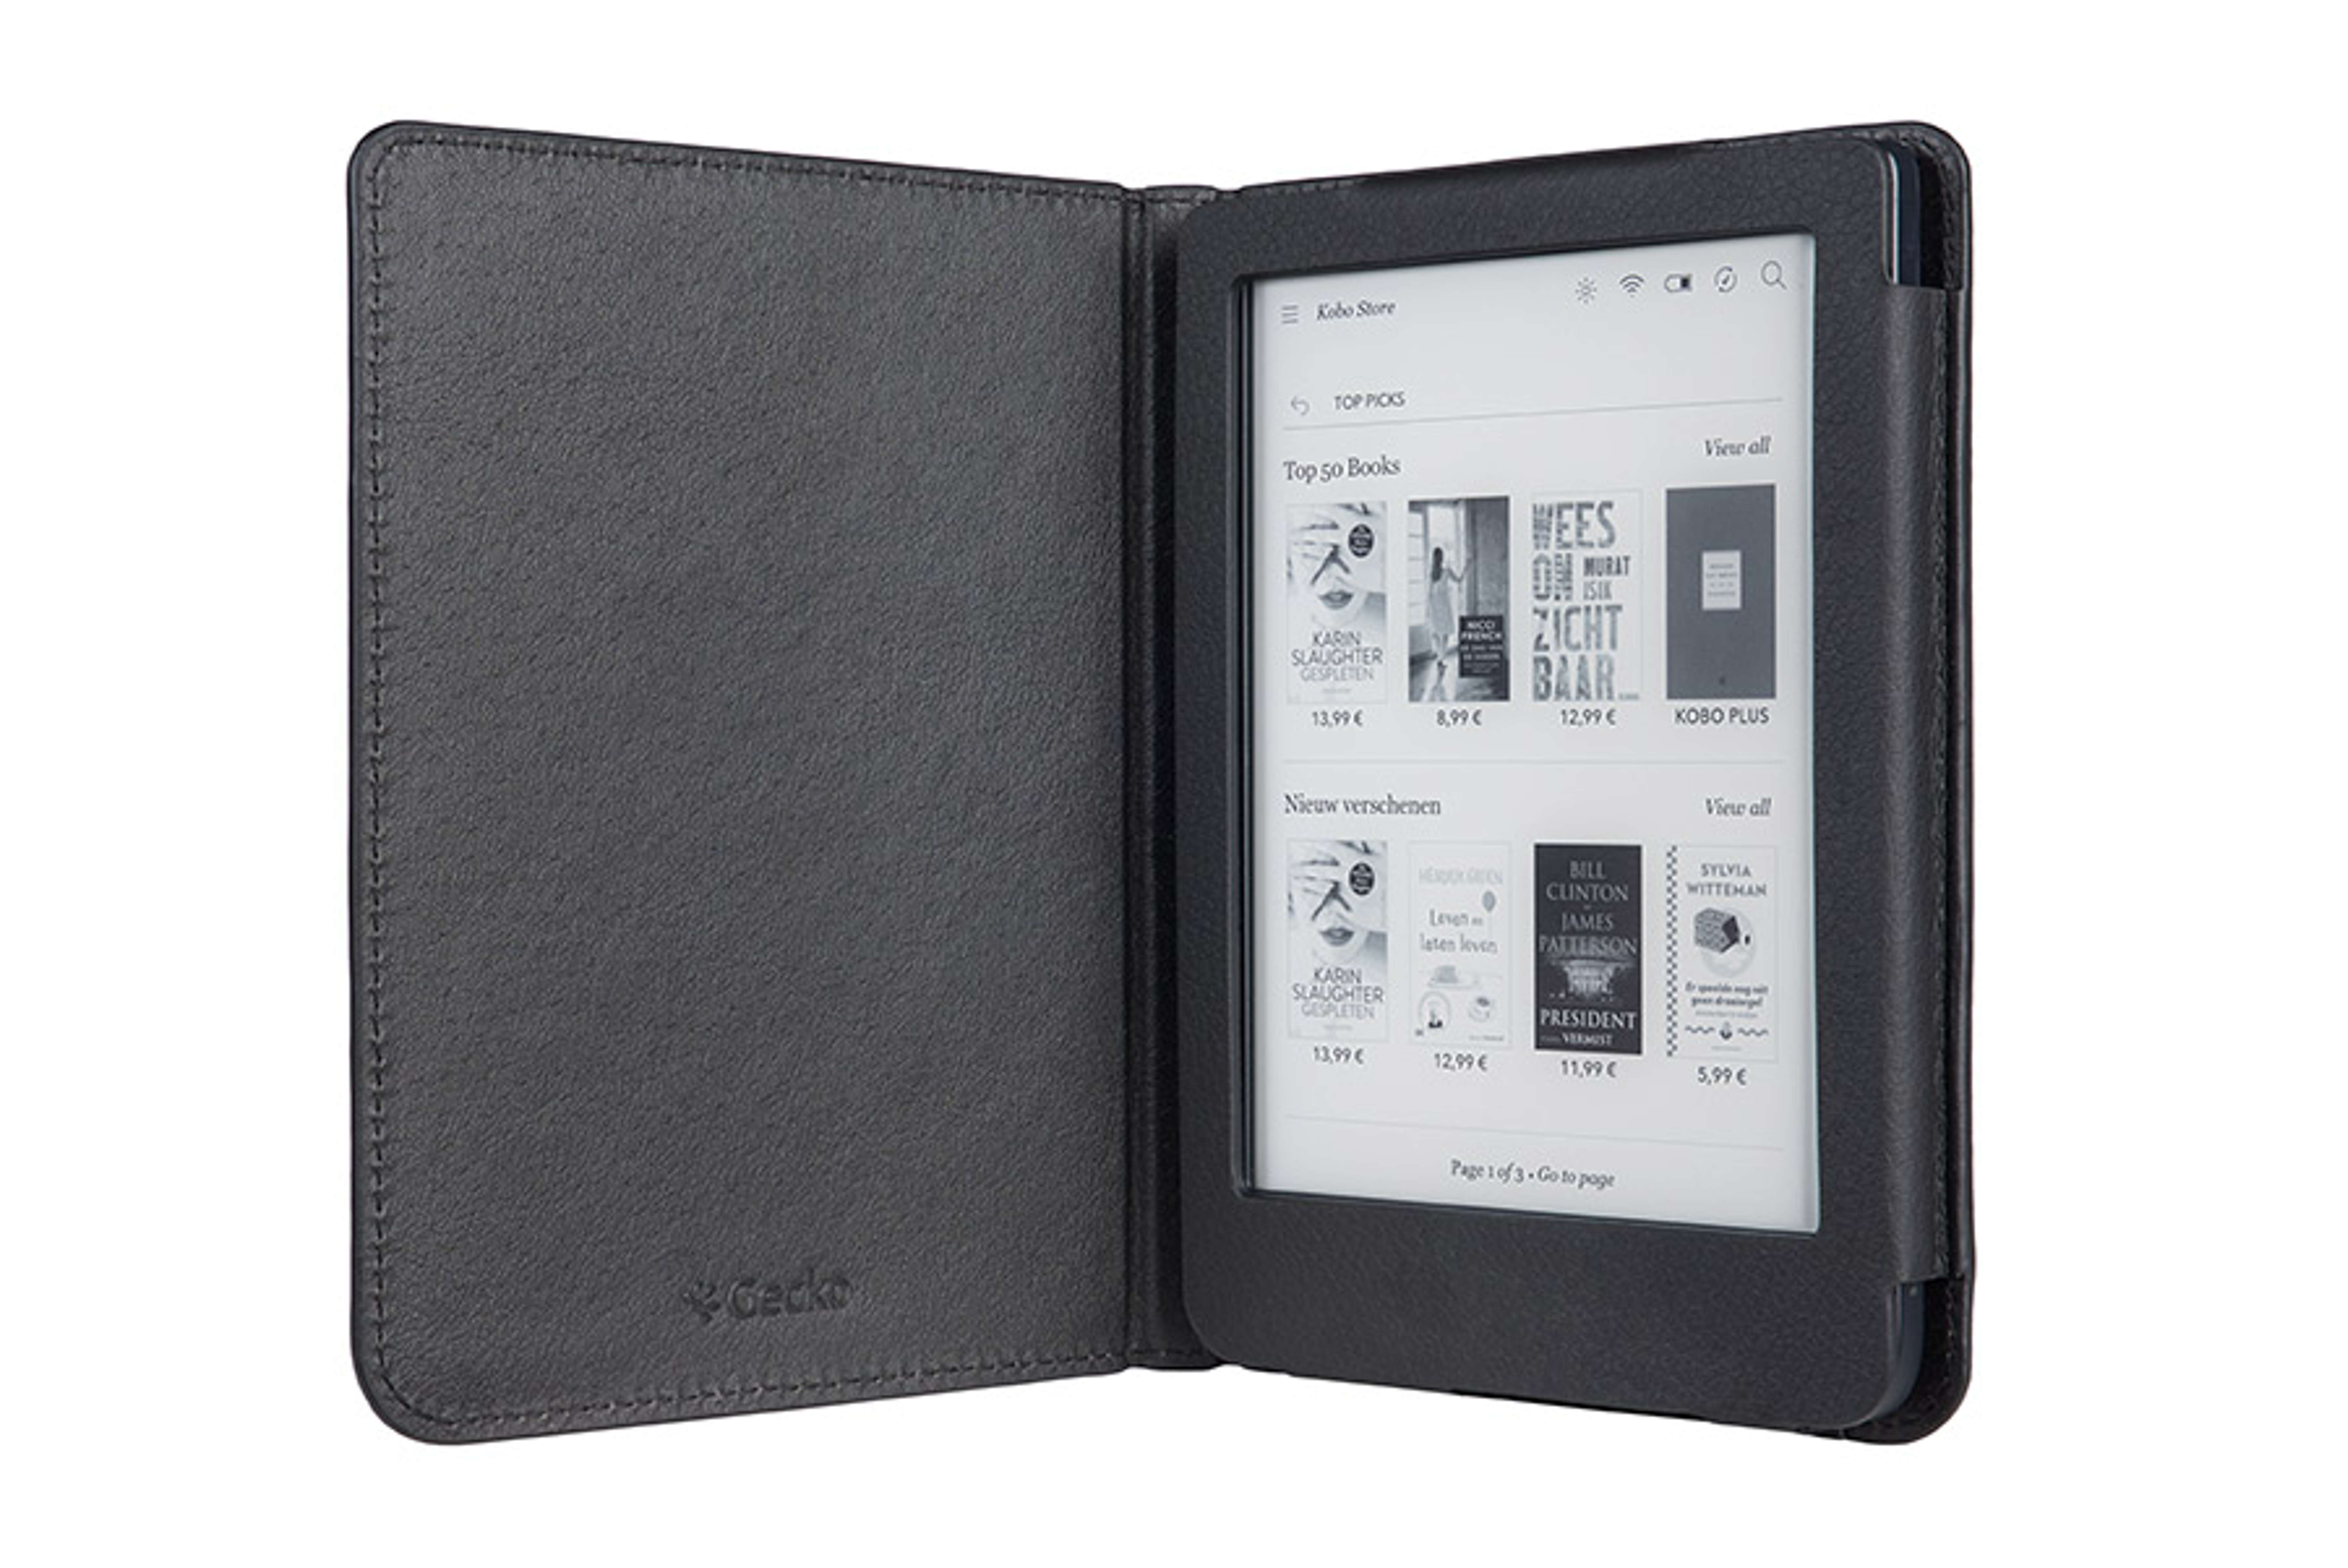 Luxe PU COVERS GECKO Kobo Leather, Schwarz Reader E-Book Hülle Cover Bookcover für